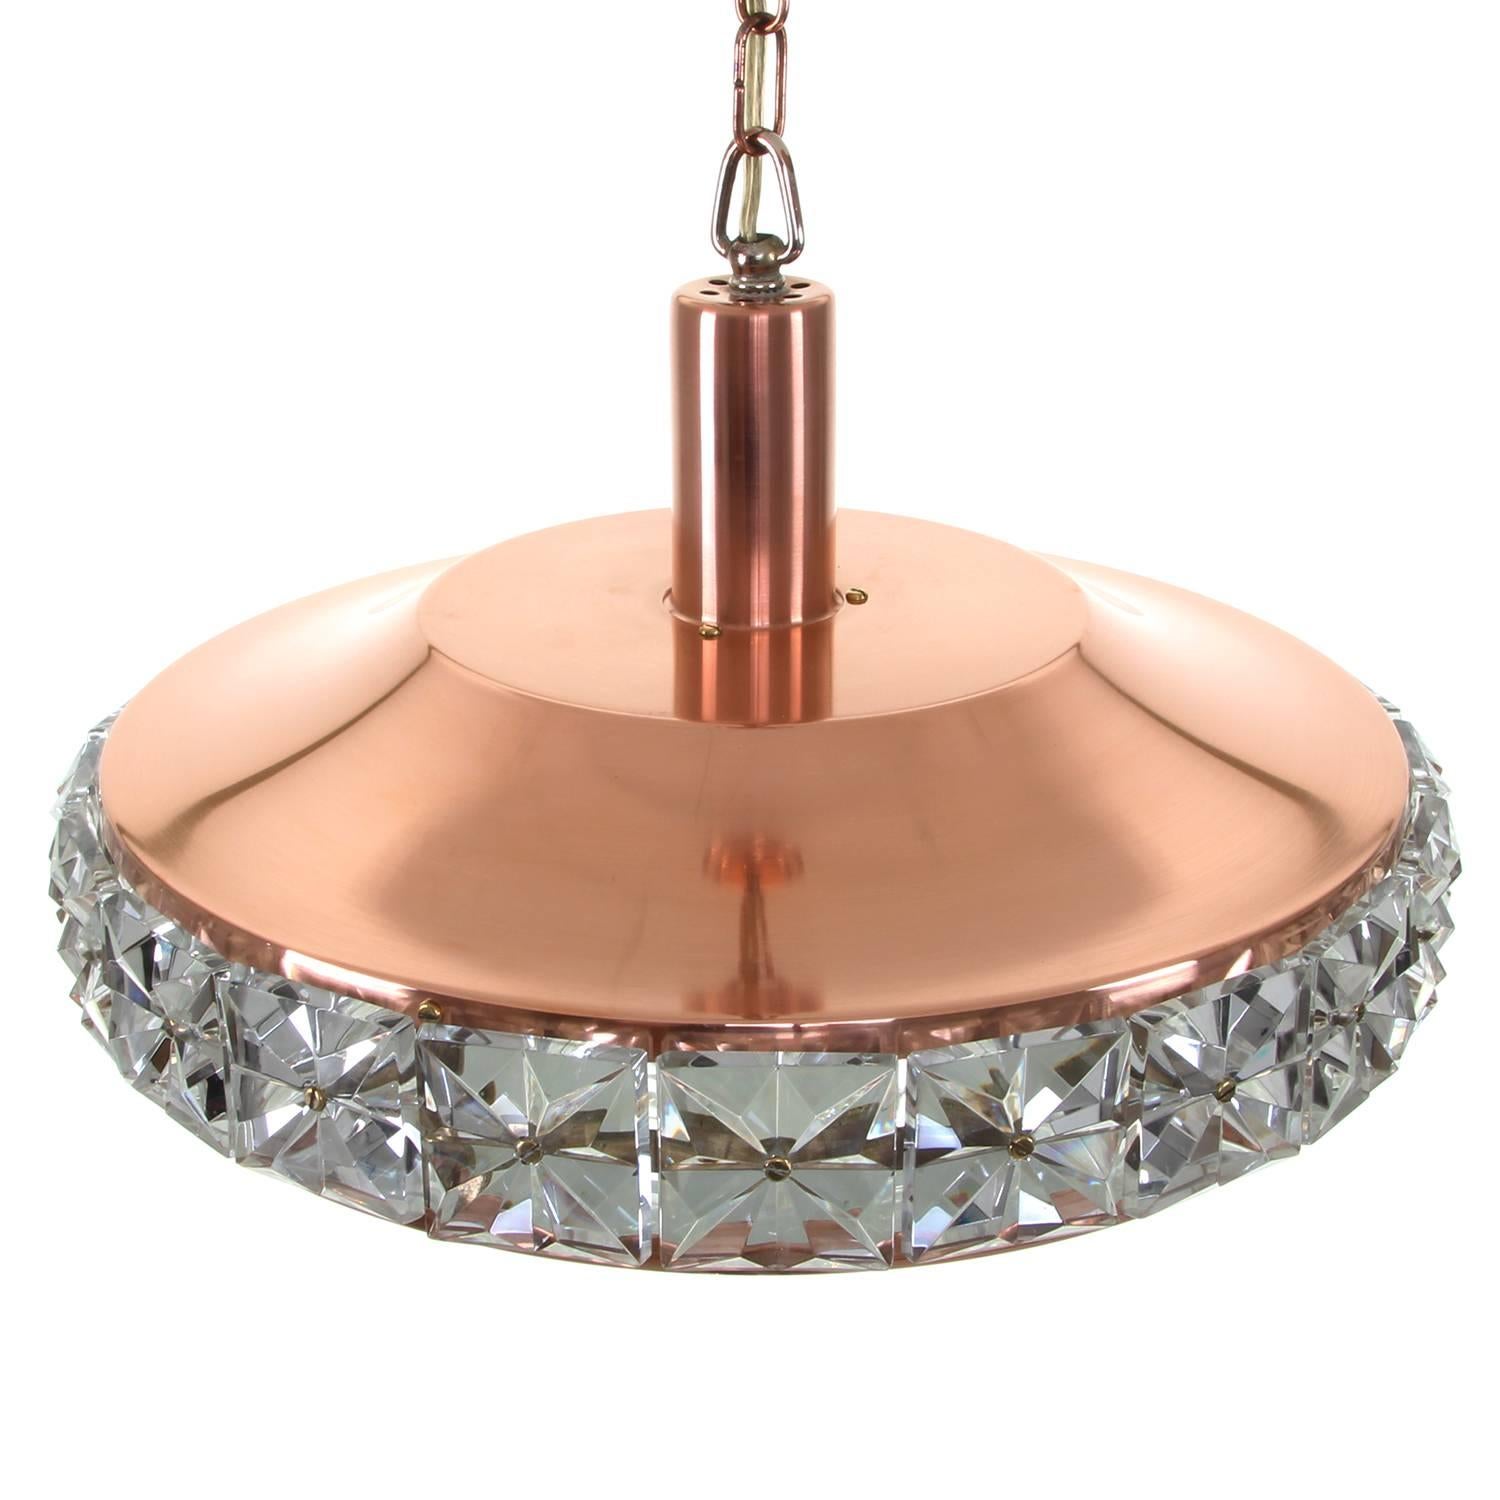 20th Century Copper and Crystal Pendant by Vitrika, 1960s, Danish Modern Copper Ceiling Light